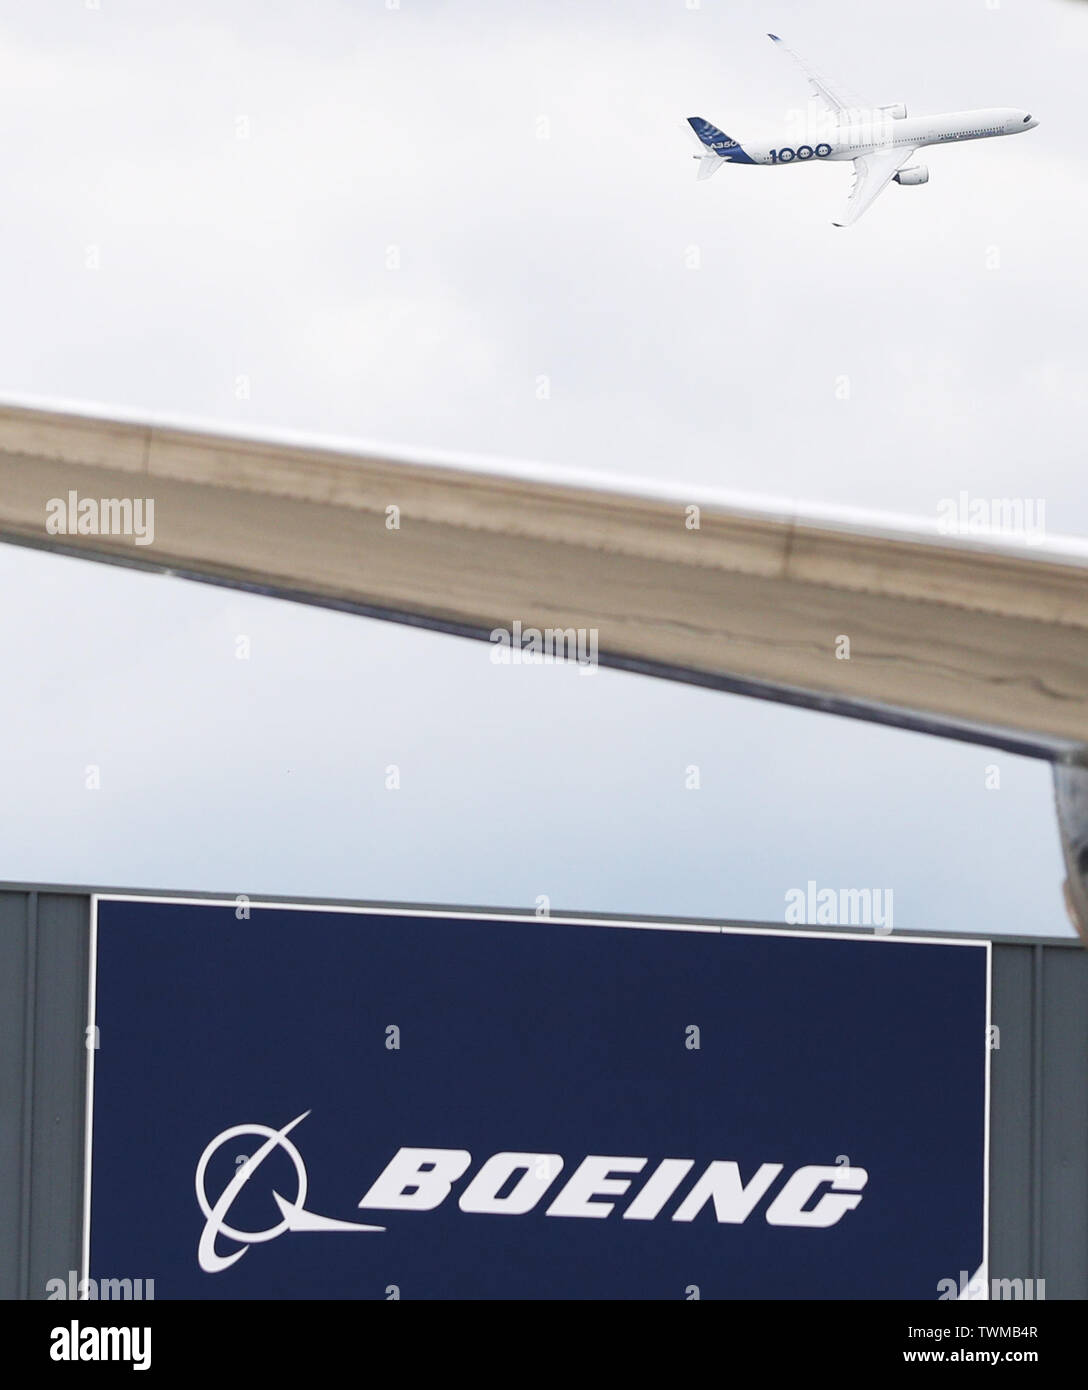 Paris, France. 20th June, 2019. An Airbus A350-1000 performs during a flight display at the 53rd International Paris Air Show held at Le Bourget Airport near Paris, France, June 20, 2019. Credit: Gao Jing/Xinhua/Alamy Live News Stock Photo